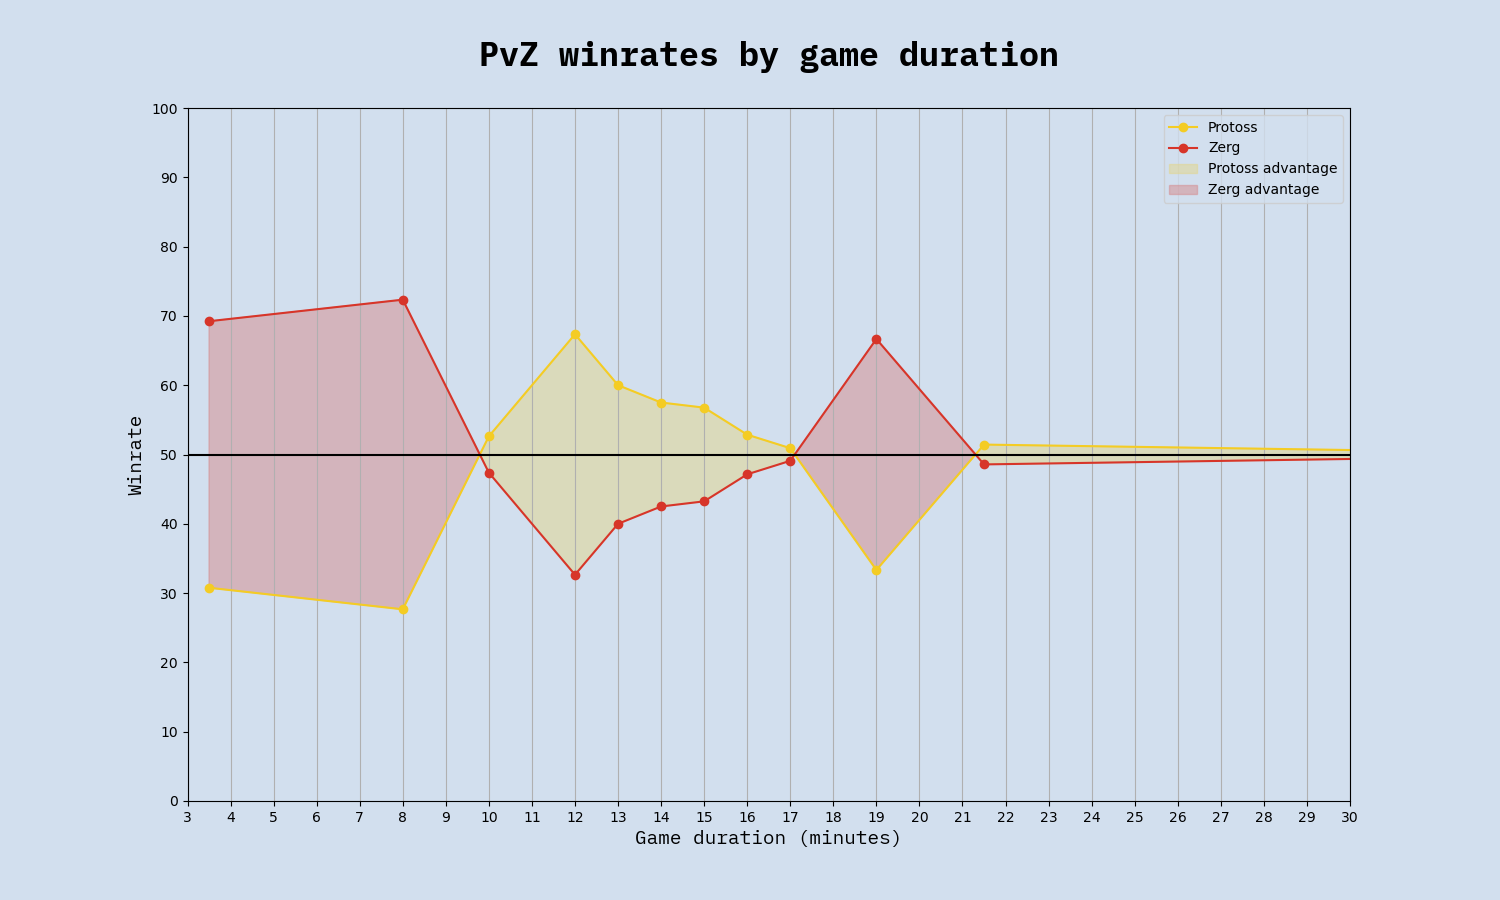 PvZ winrate by game duration